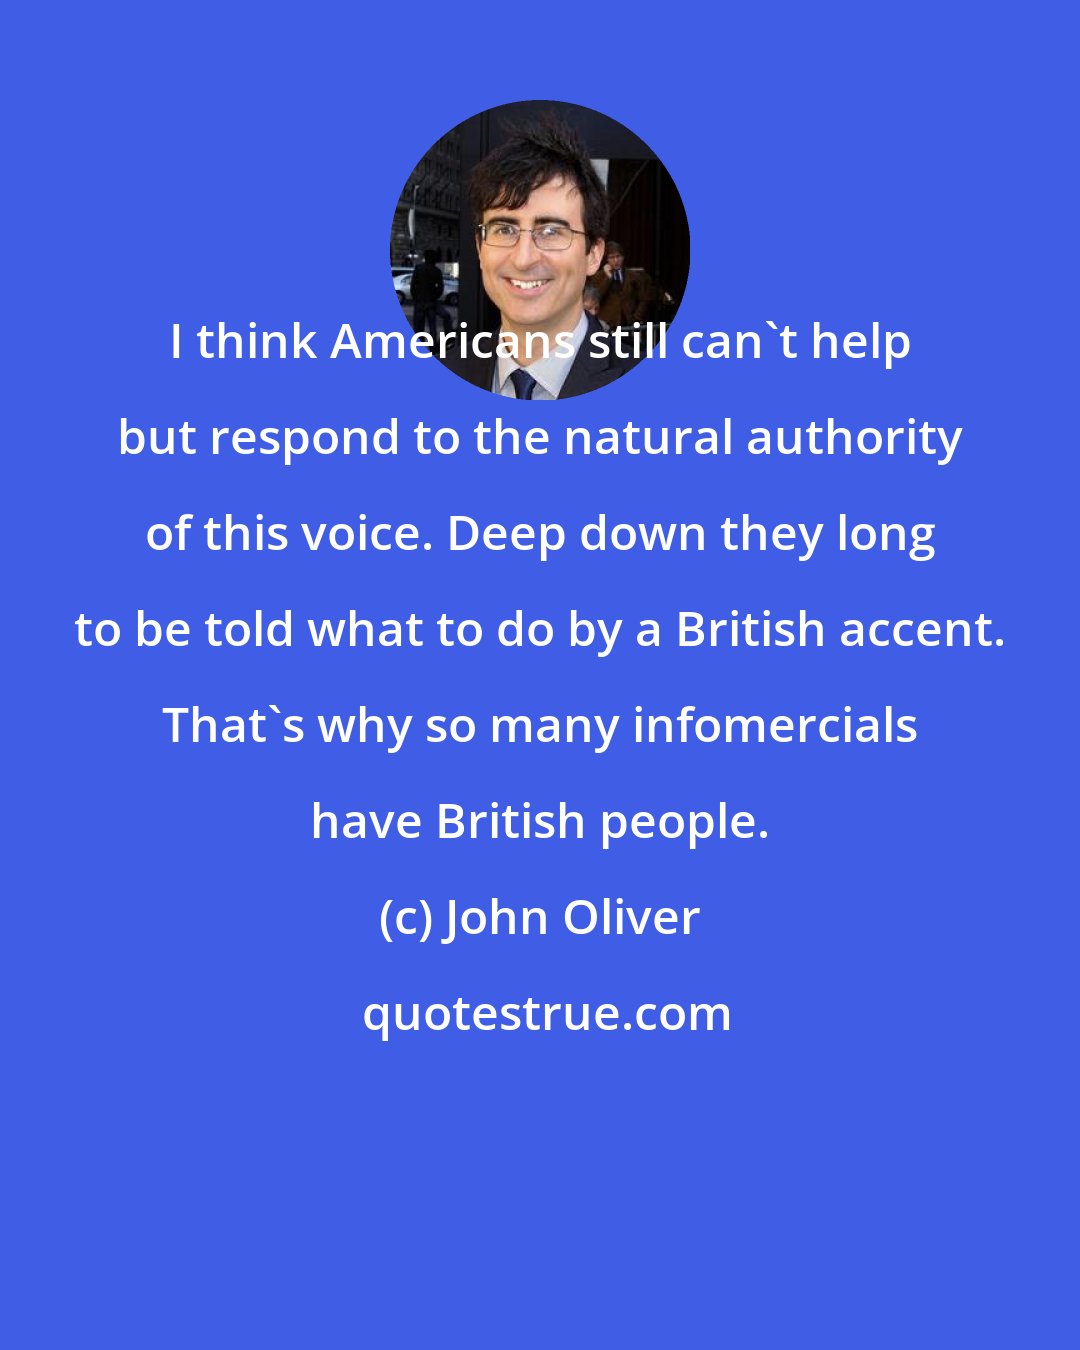 John Oliver: I think Americans still can't help but respond to the natural authority of this voice. Deep down they long to be told what to do by a British accent. That's why so many infomercials have British people.